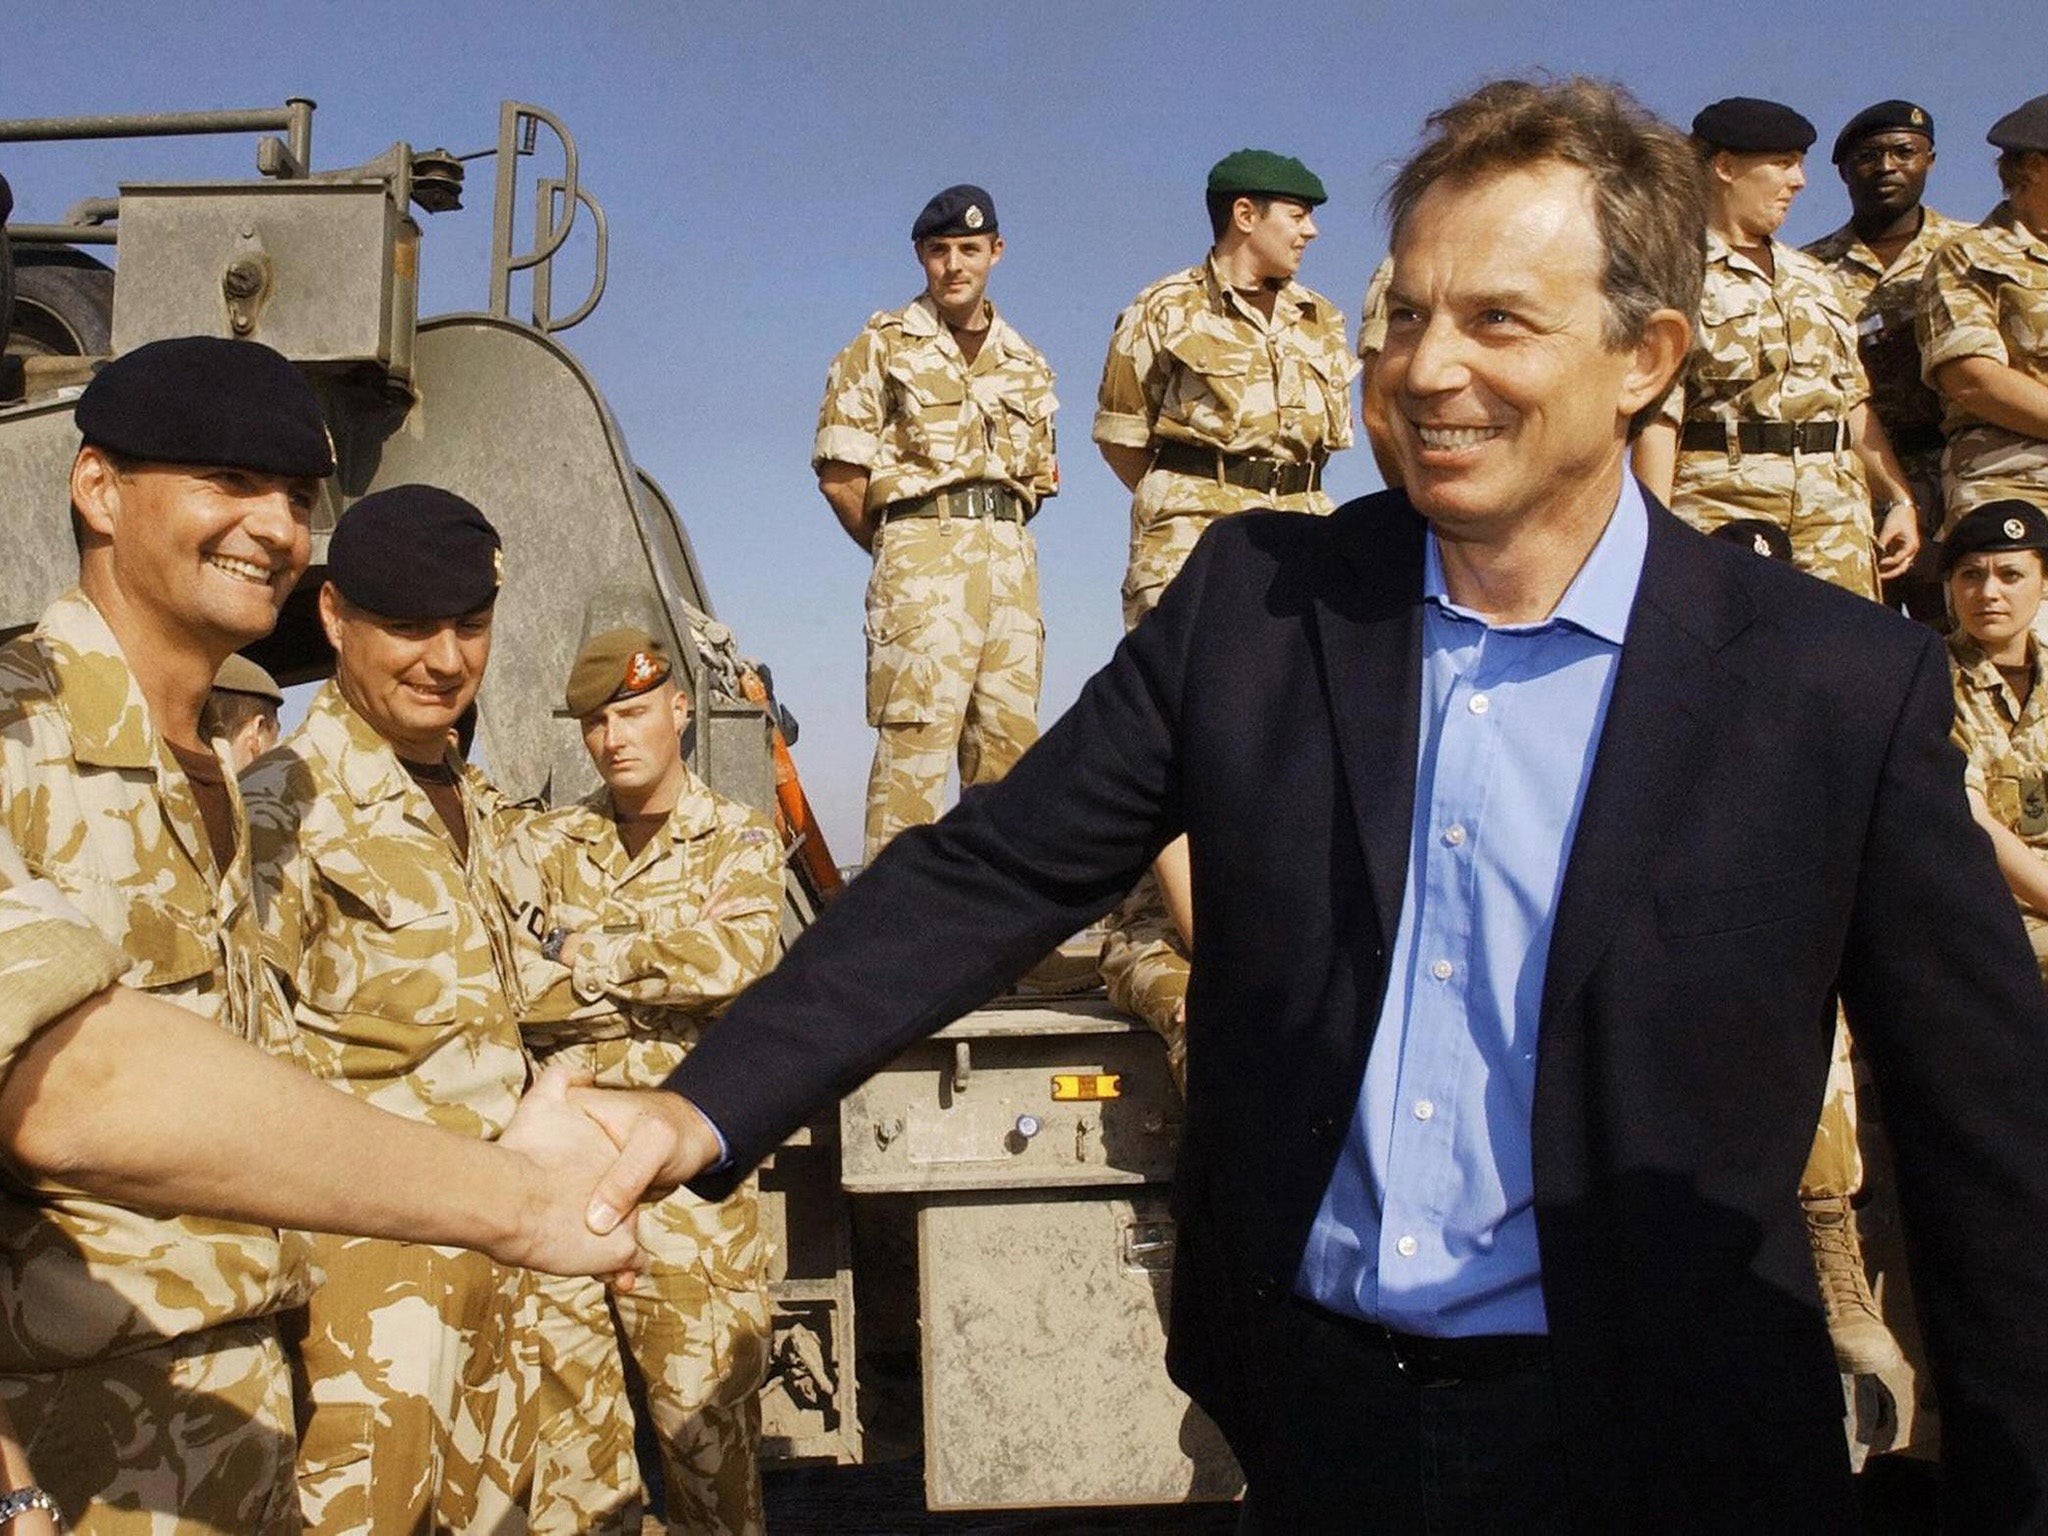 Both Blair and the armed forces who carried out his orders are to blame for Iraq